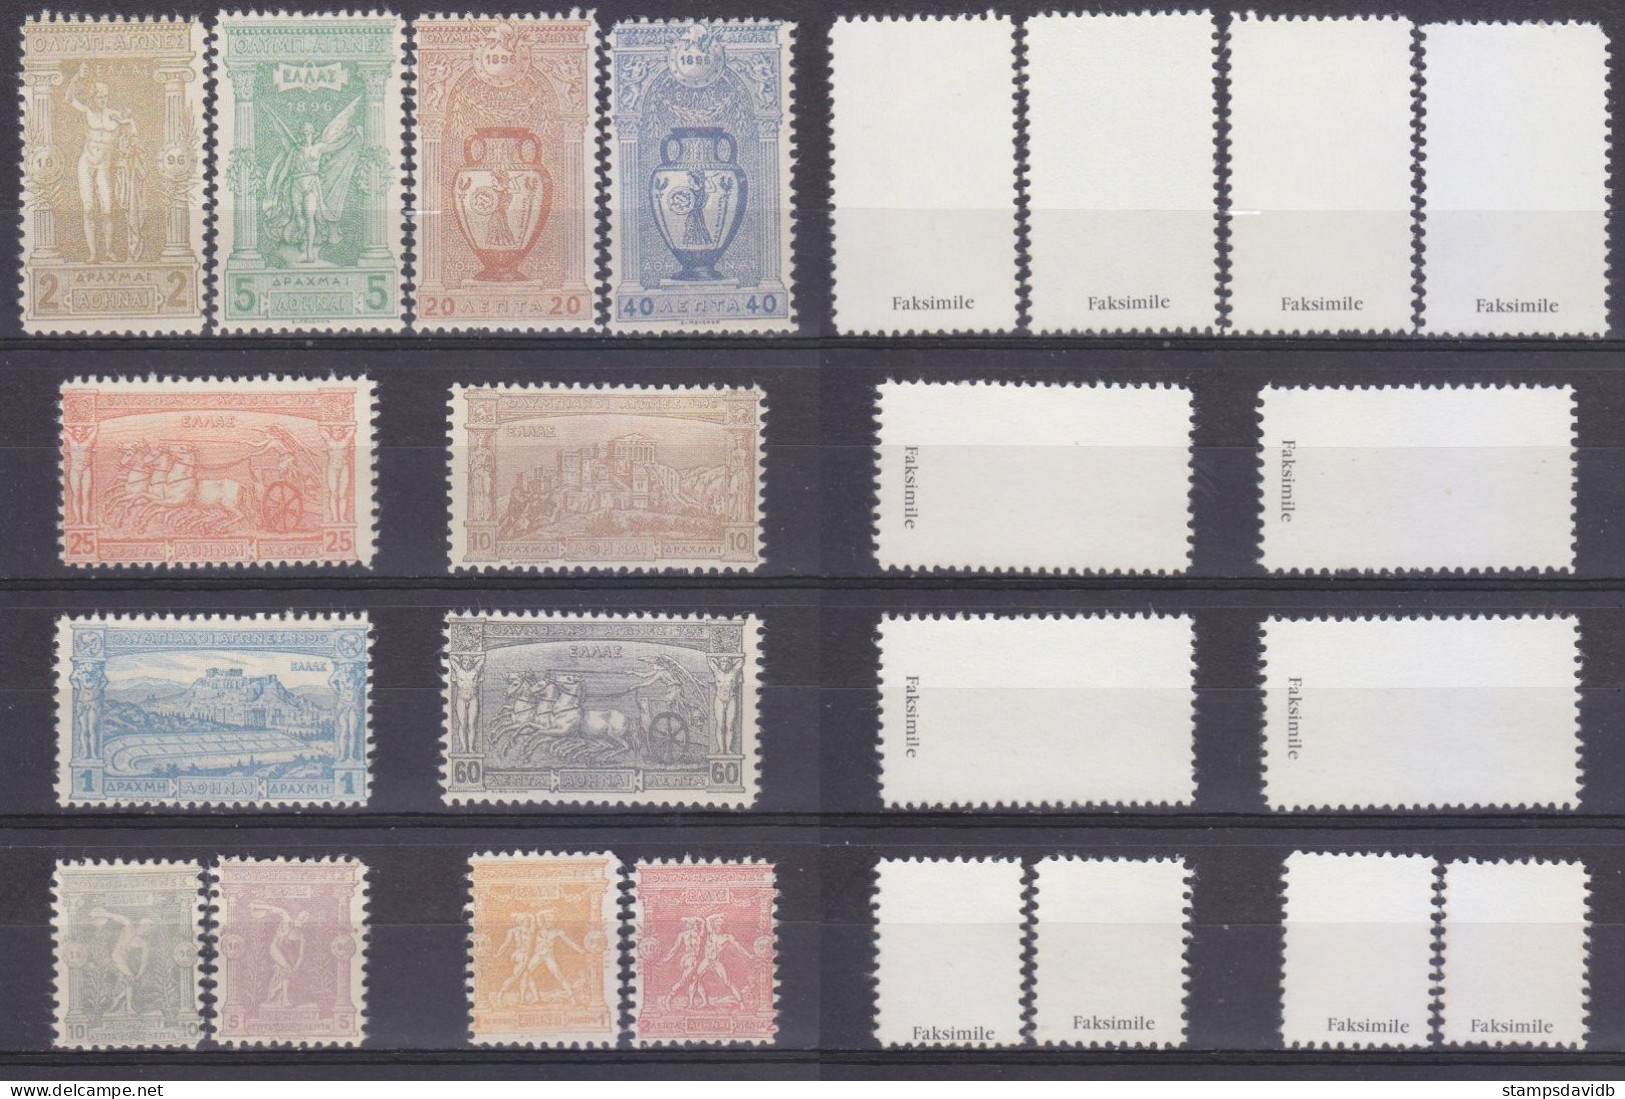 1896 Greece 96-107 Faksimile Olympic Games 1 500,00 € - Ete 1896: Athènes